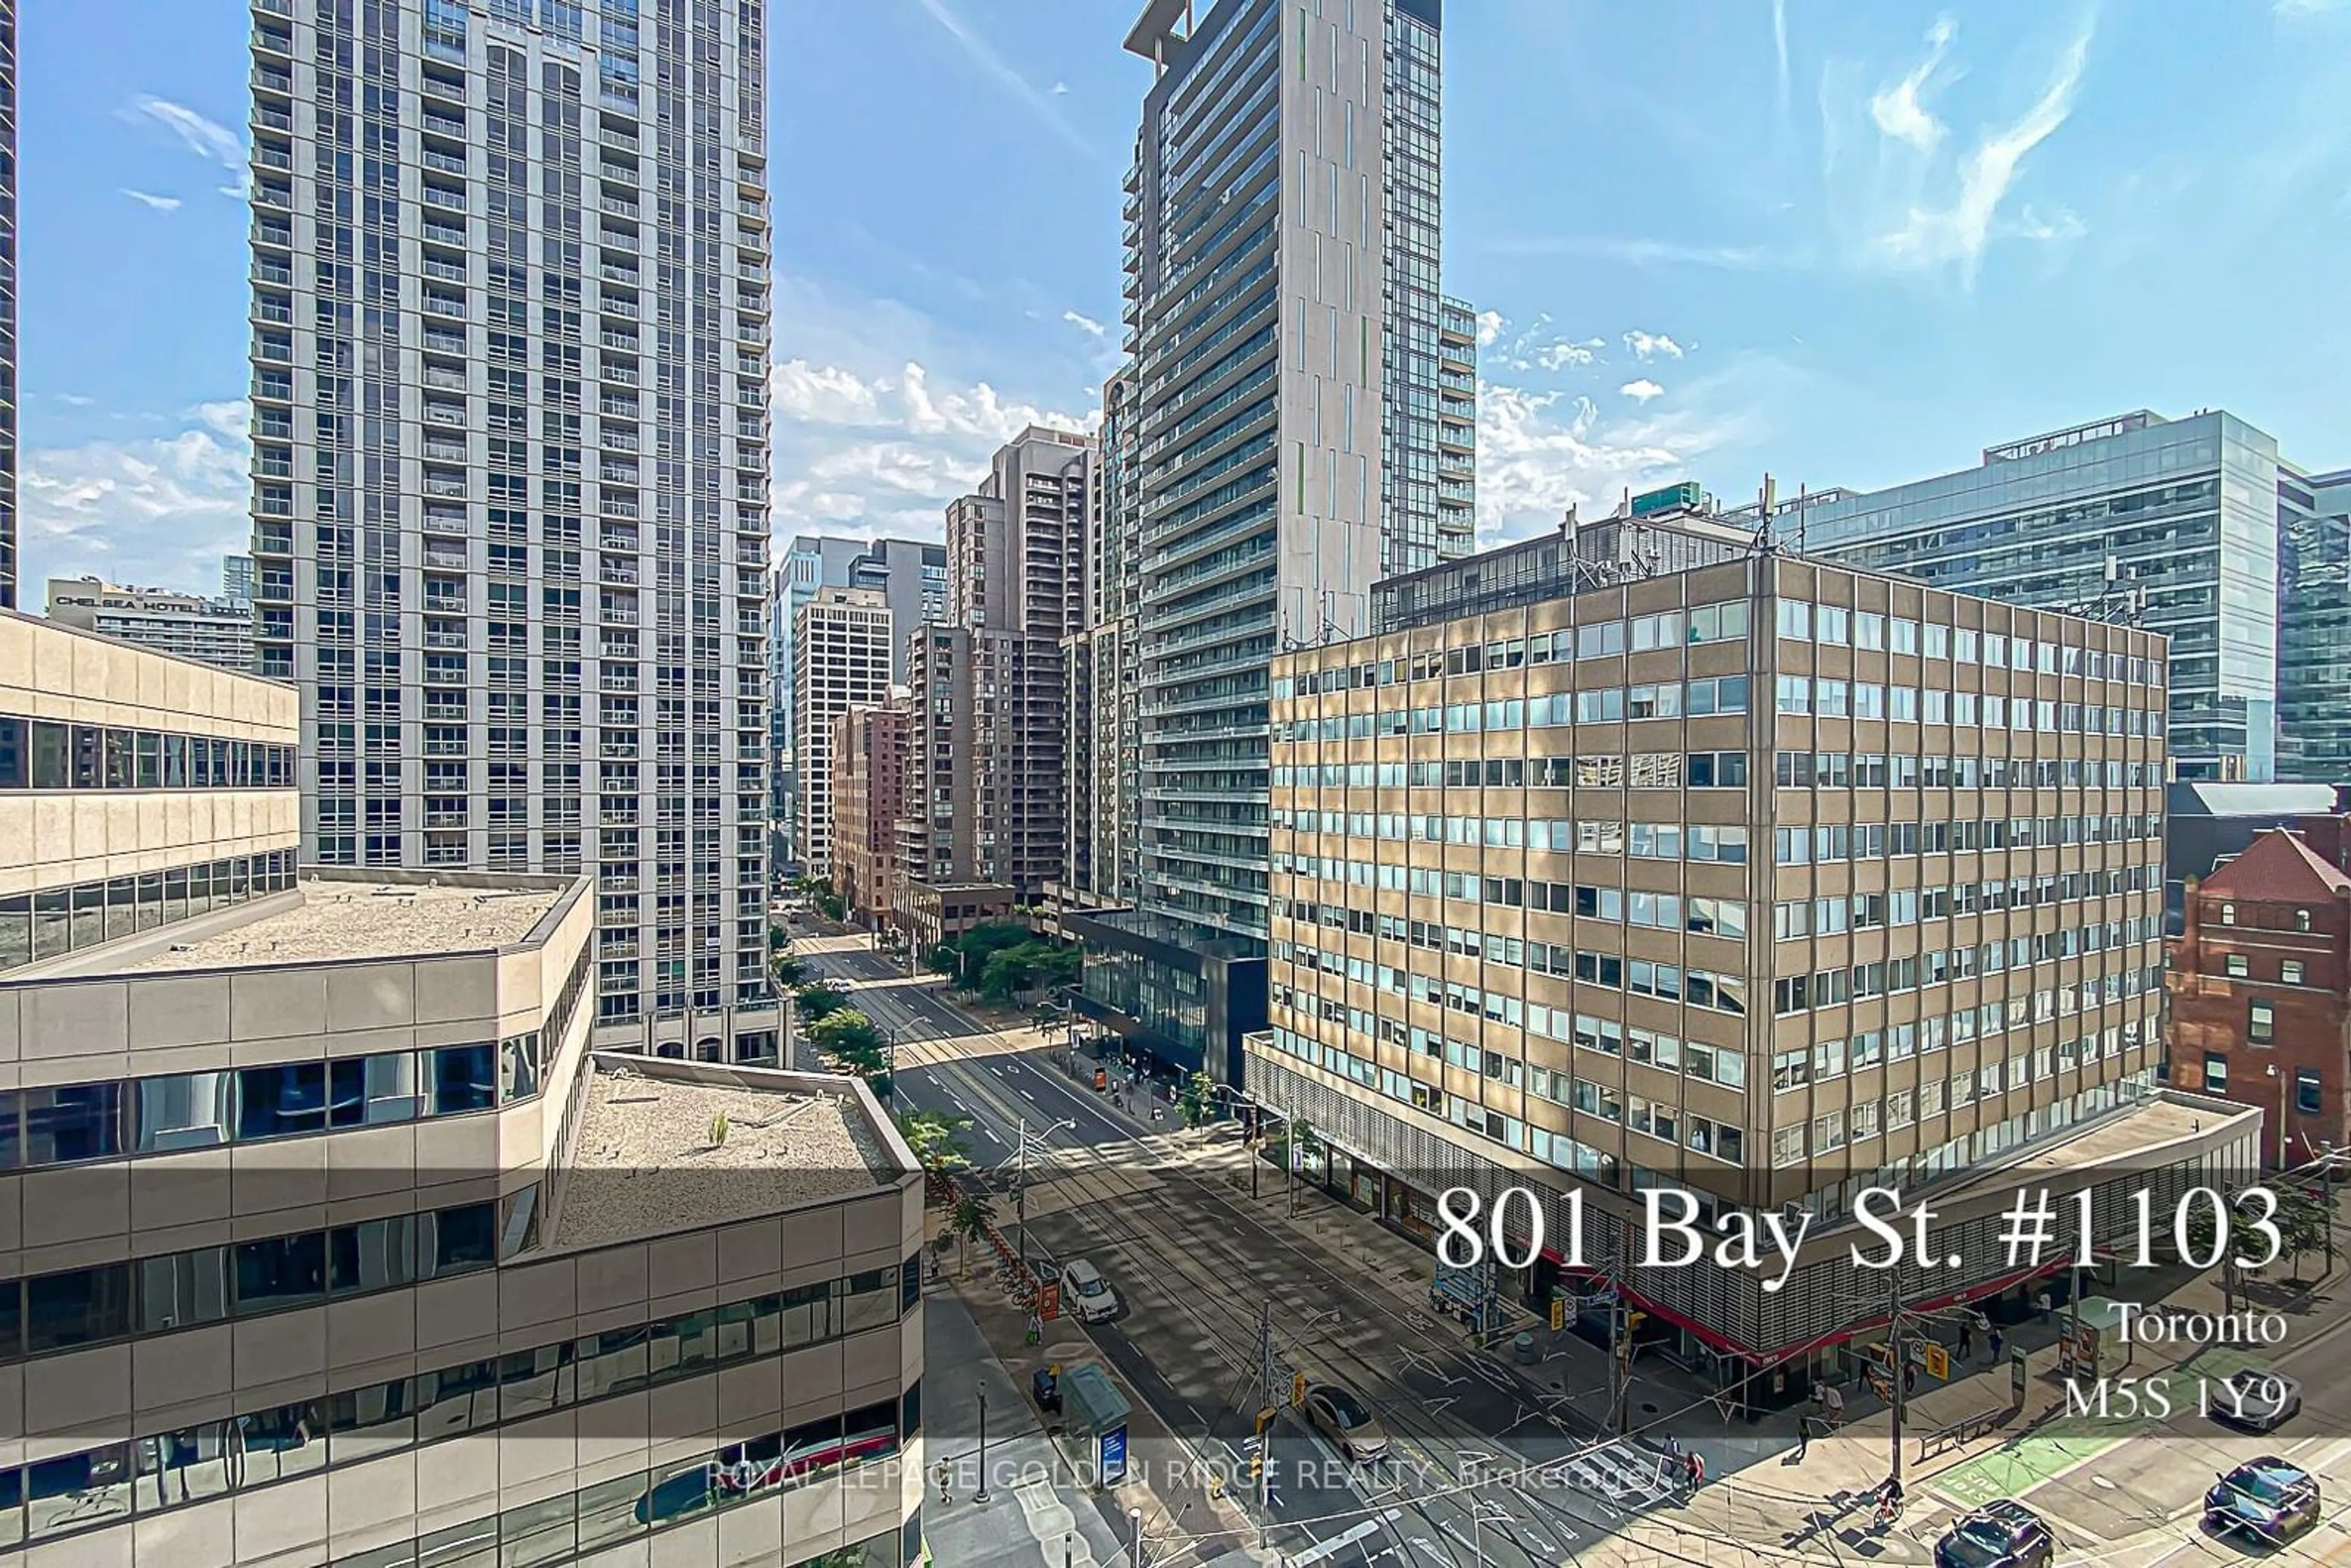 Street view for 801 Bay St #1103, Toronto Ontario M5S 1Y9